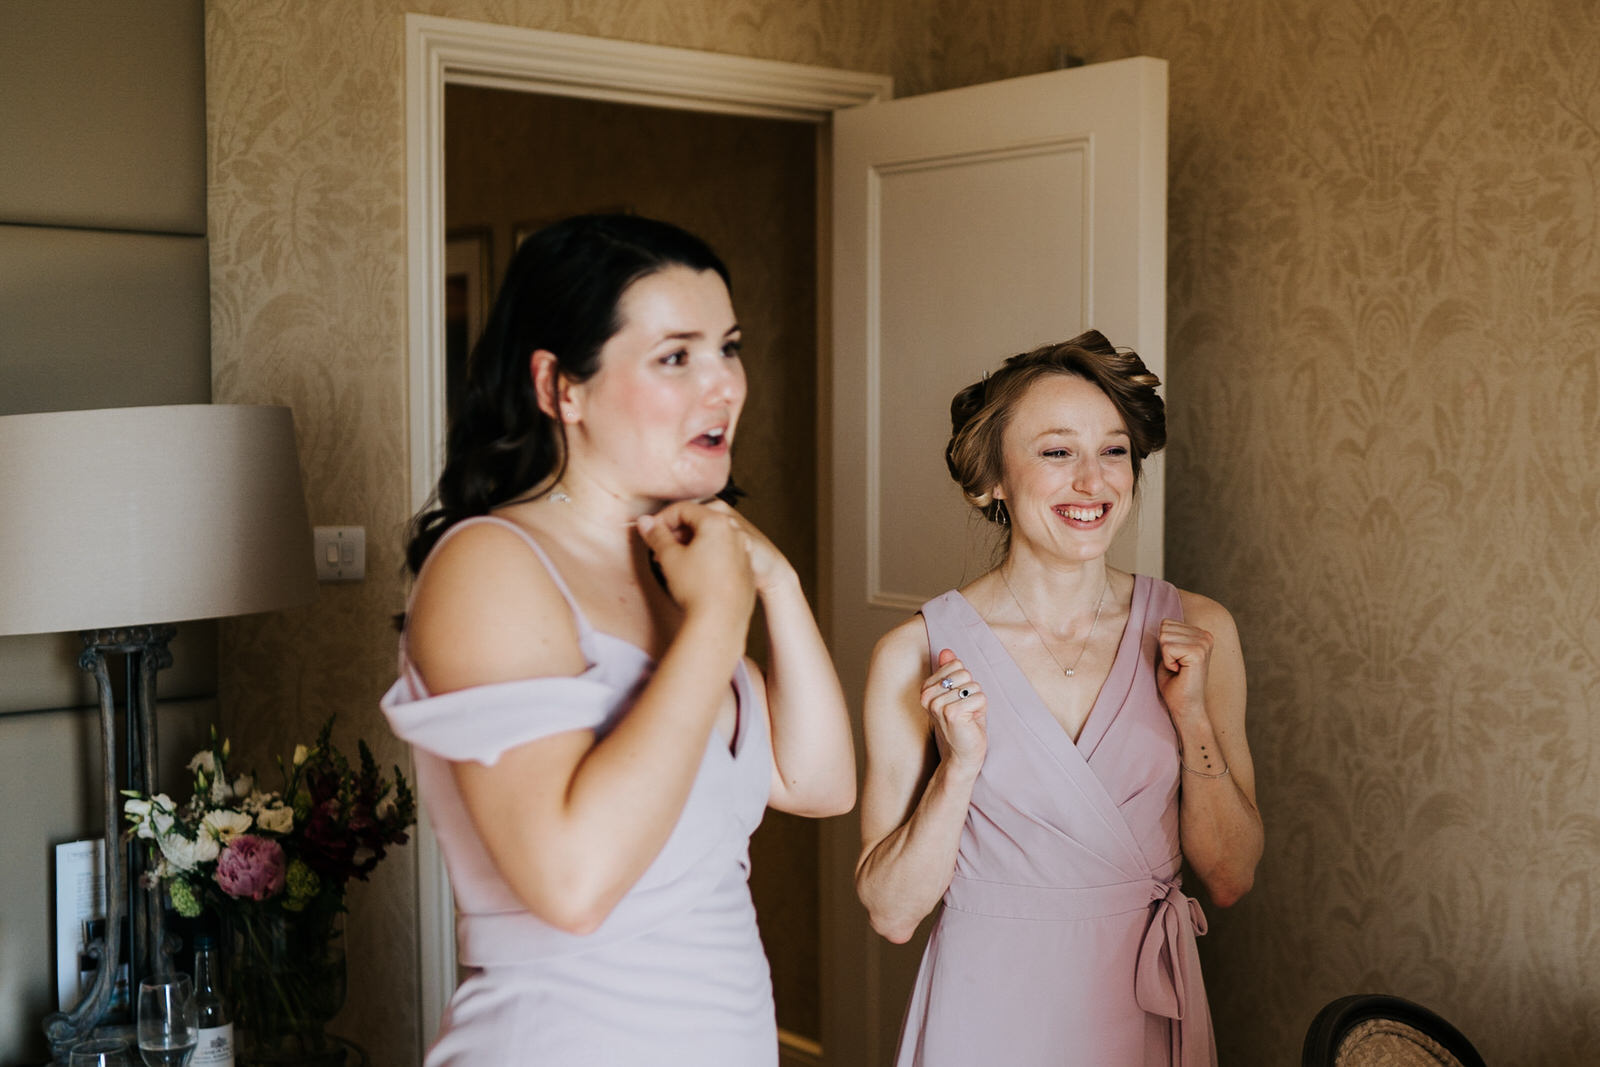  Two bridesmaids raise their hands in excitement as bridesmaid finishes getting ready 